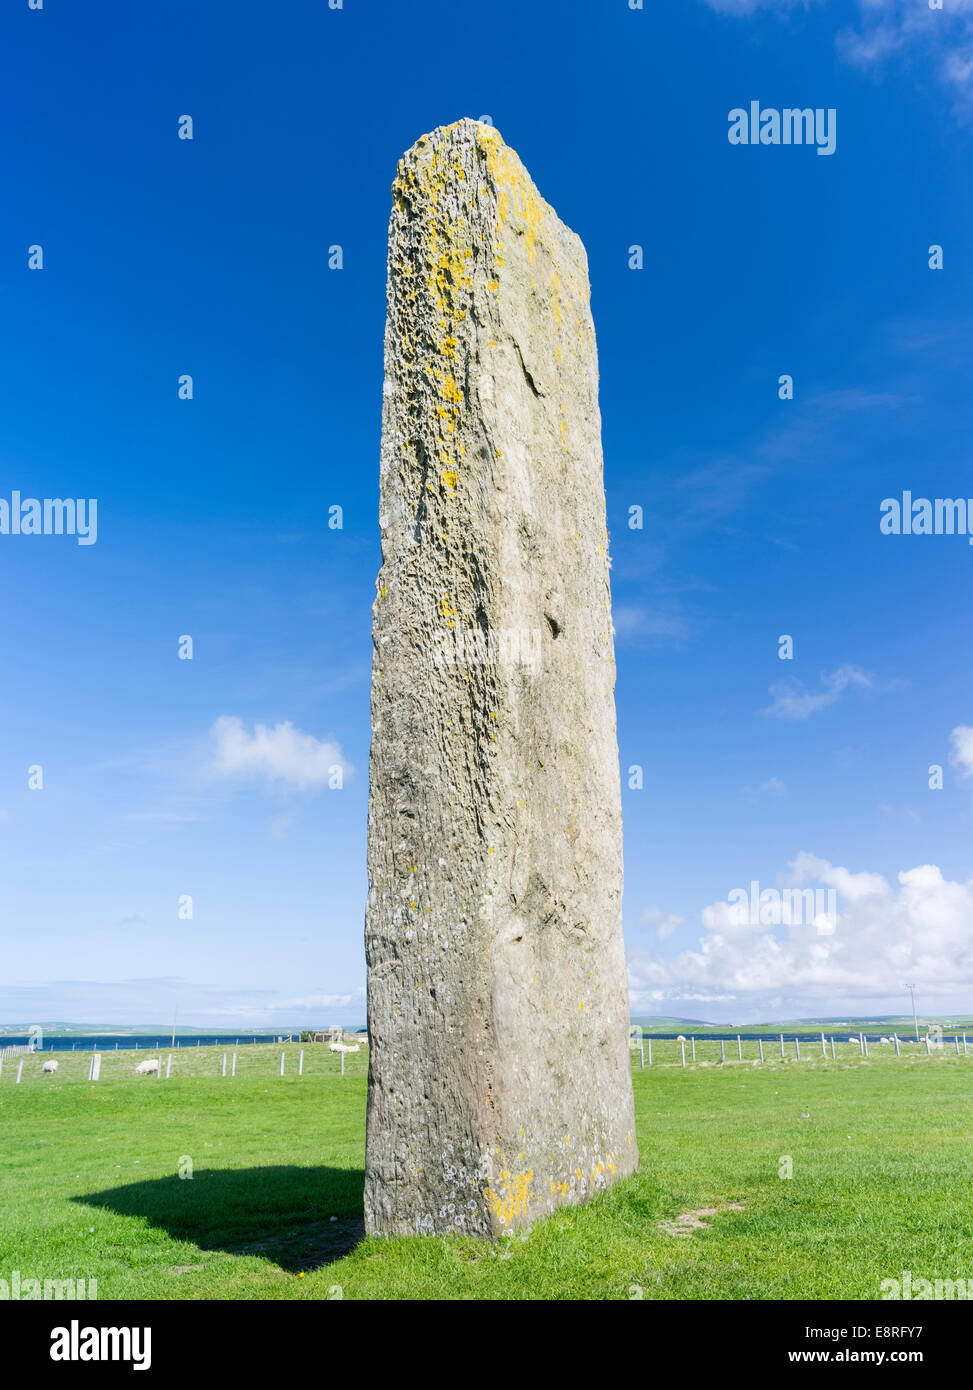 Standing Stones of Stenness, a UNESCO World Heritage Site, Heart of Neolithic Orkney, Orkney Islands, Scotland. Stock Photo